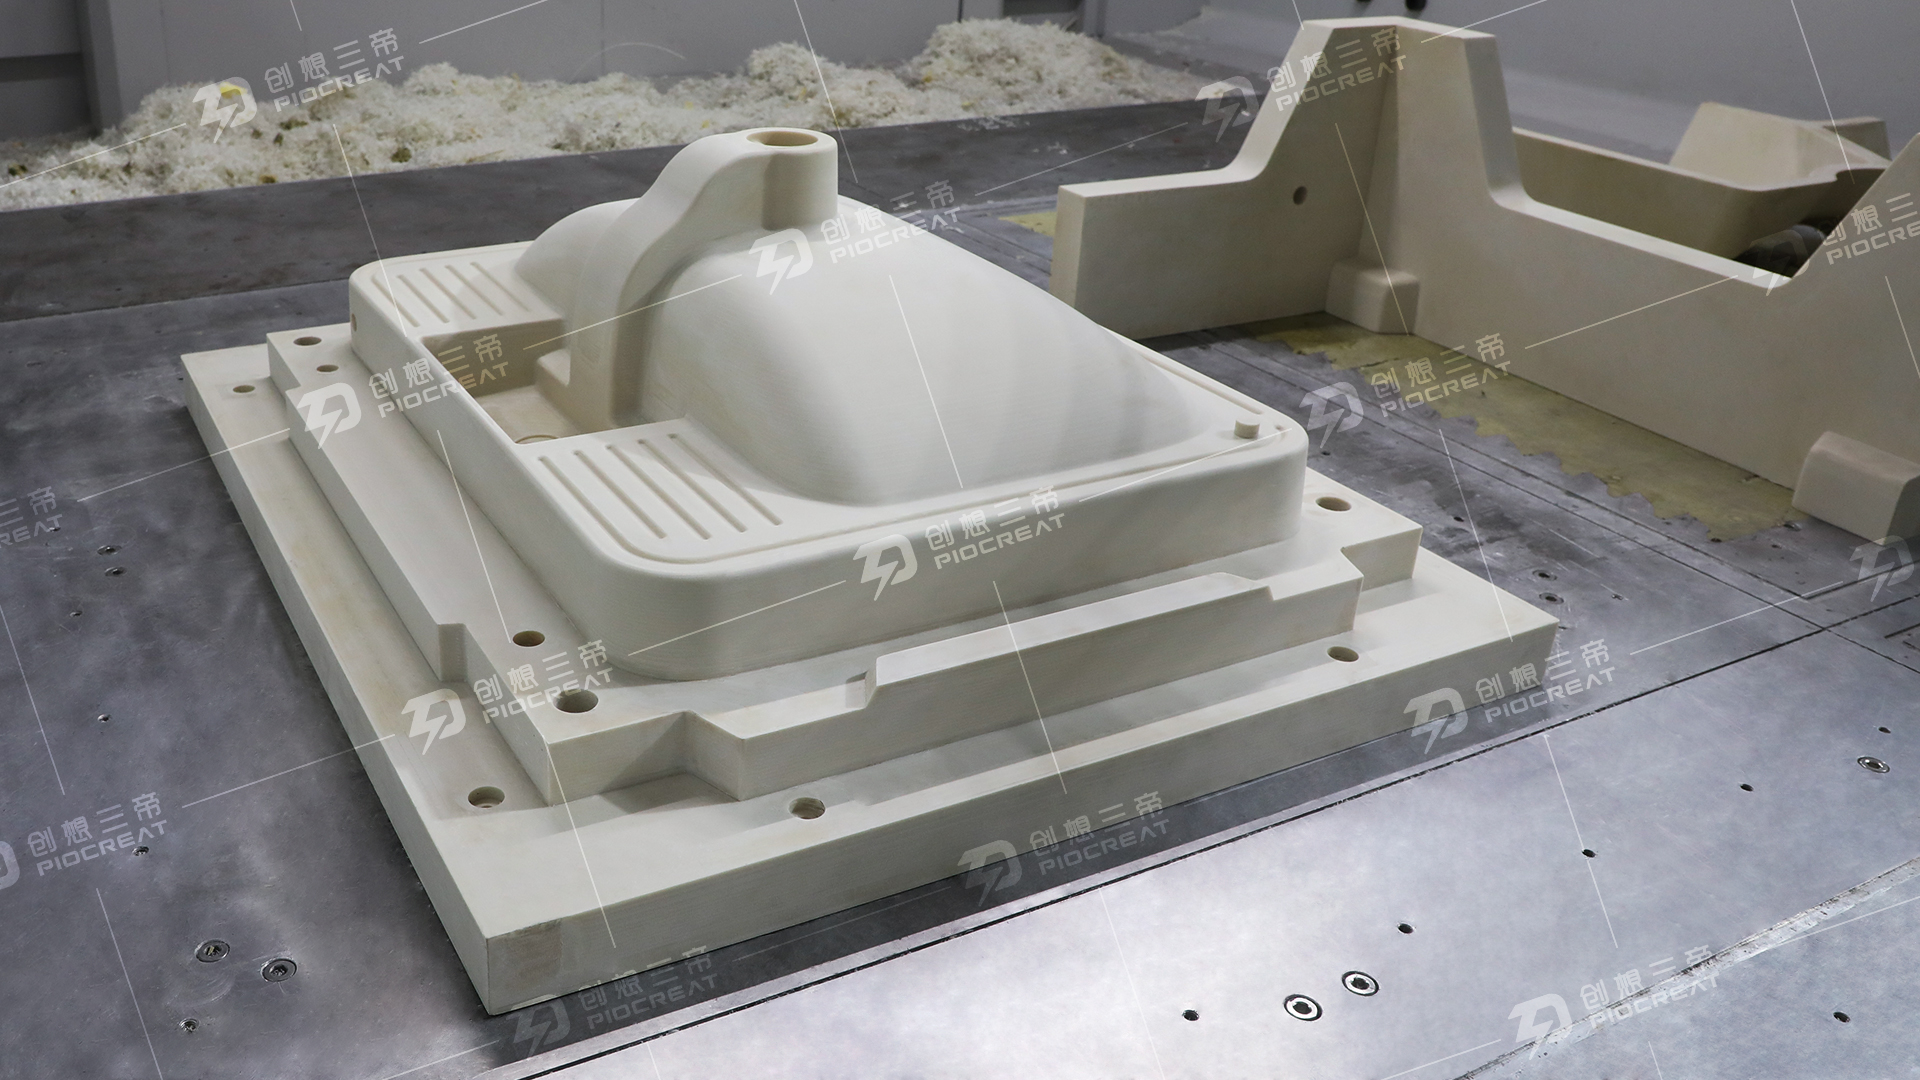 3D Printing and CNC Are Friends, Not Enemies